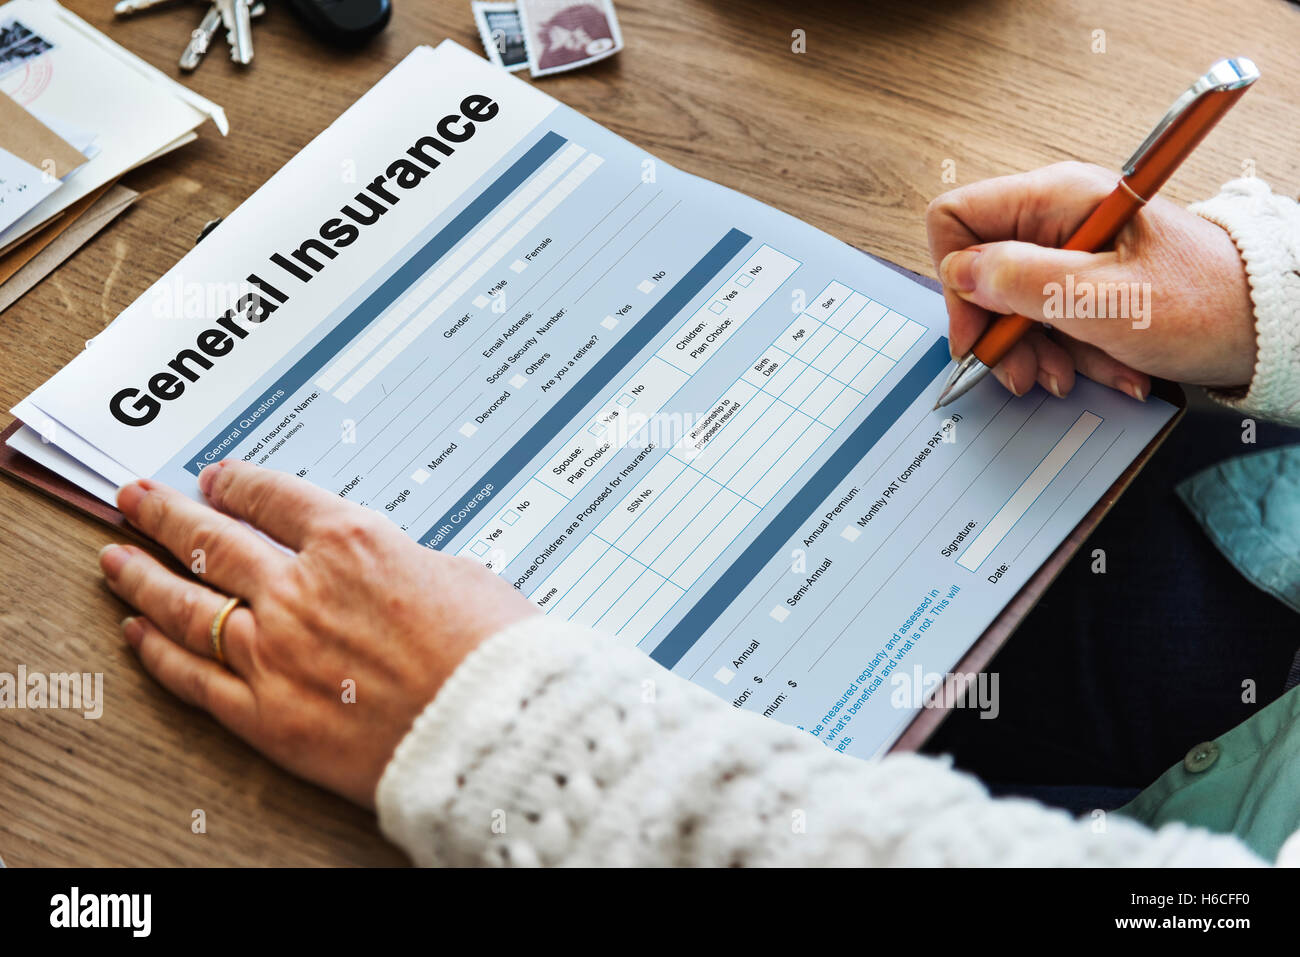 general-insurance-rebate-form-information-concept-stock-photo-alamy